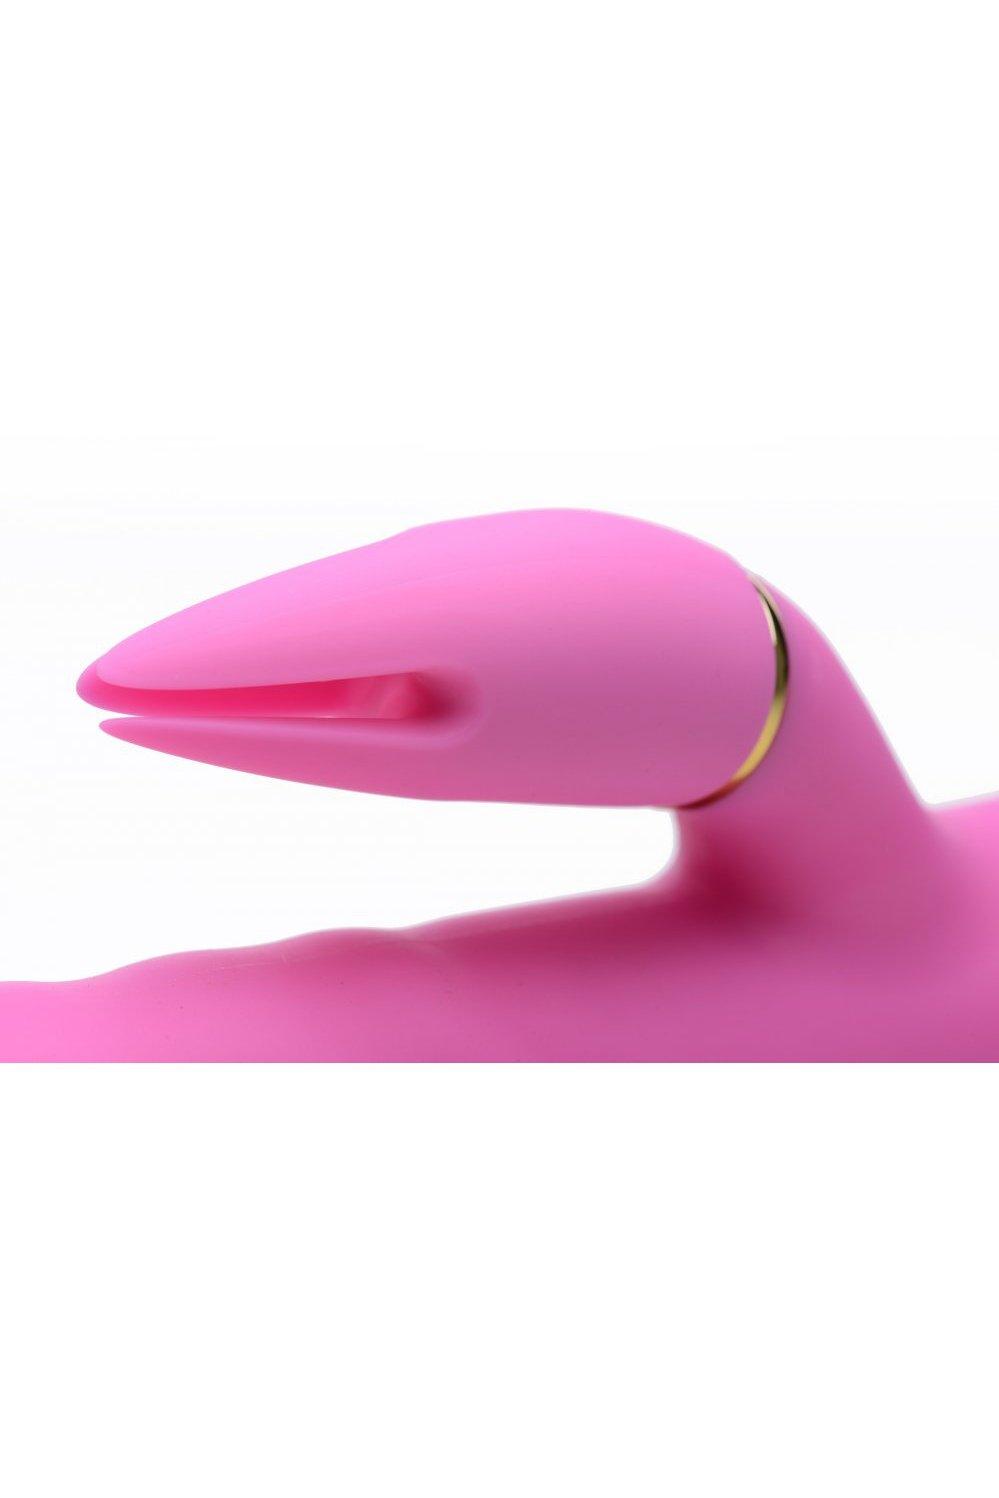 10X Versa-Thrust Vibrating and Thrusting Silicone Rabbit with 3 Attachments - Sex On the Go